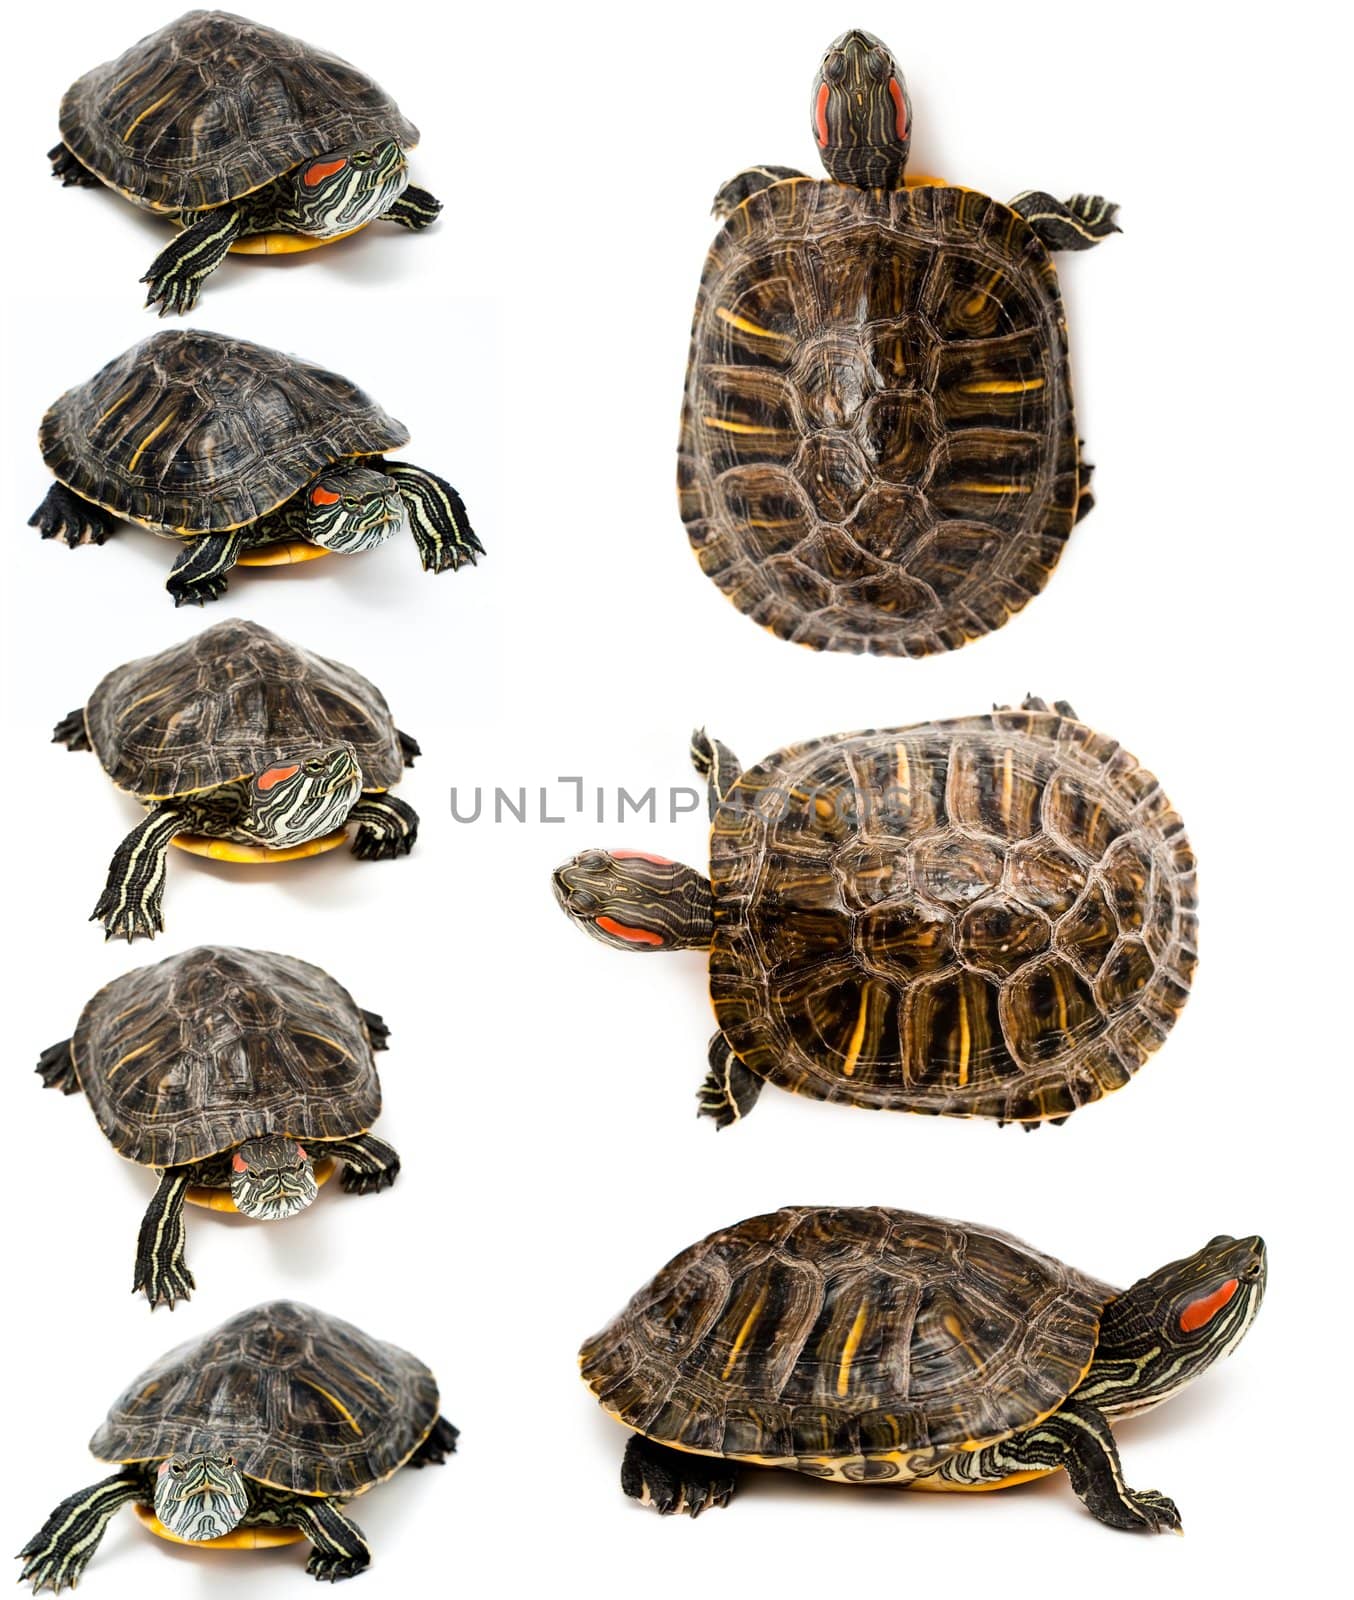 An image of Red Eared Slider Turtles on white background 